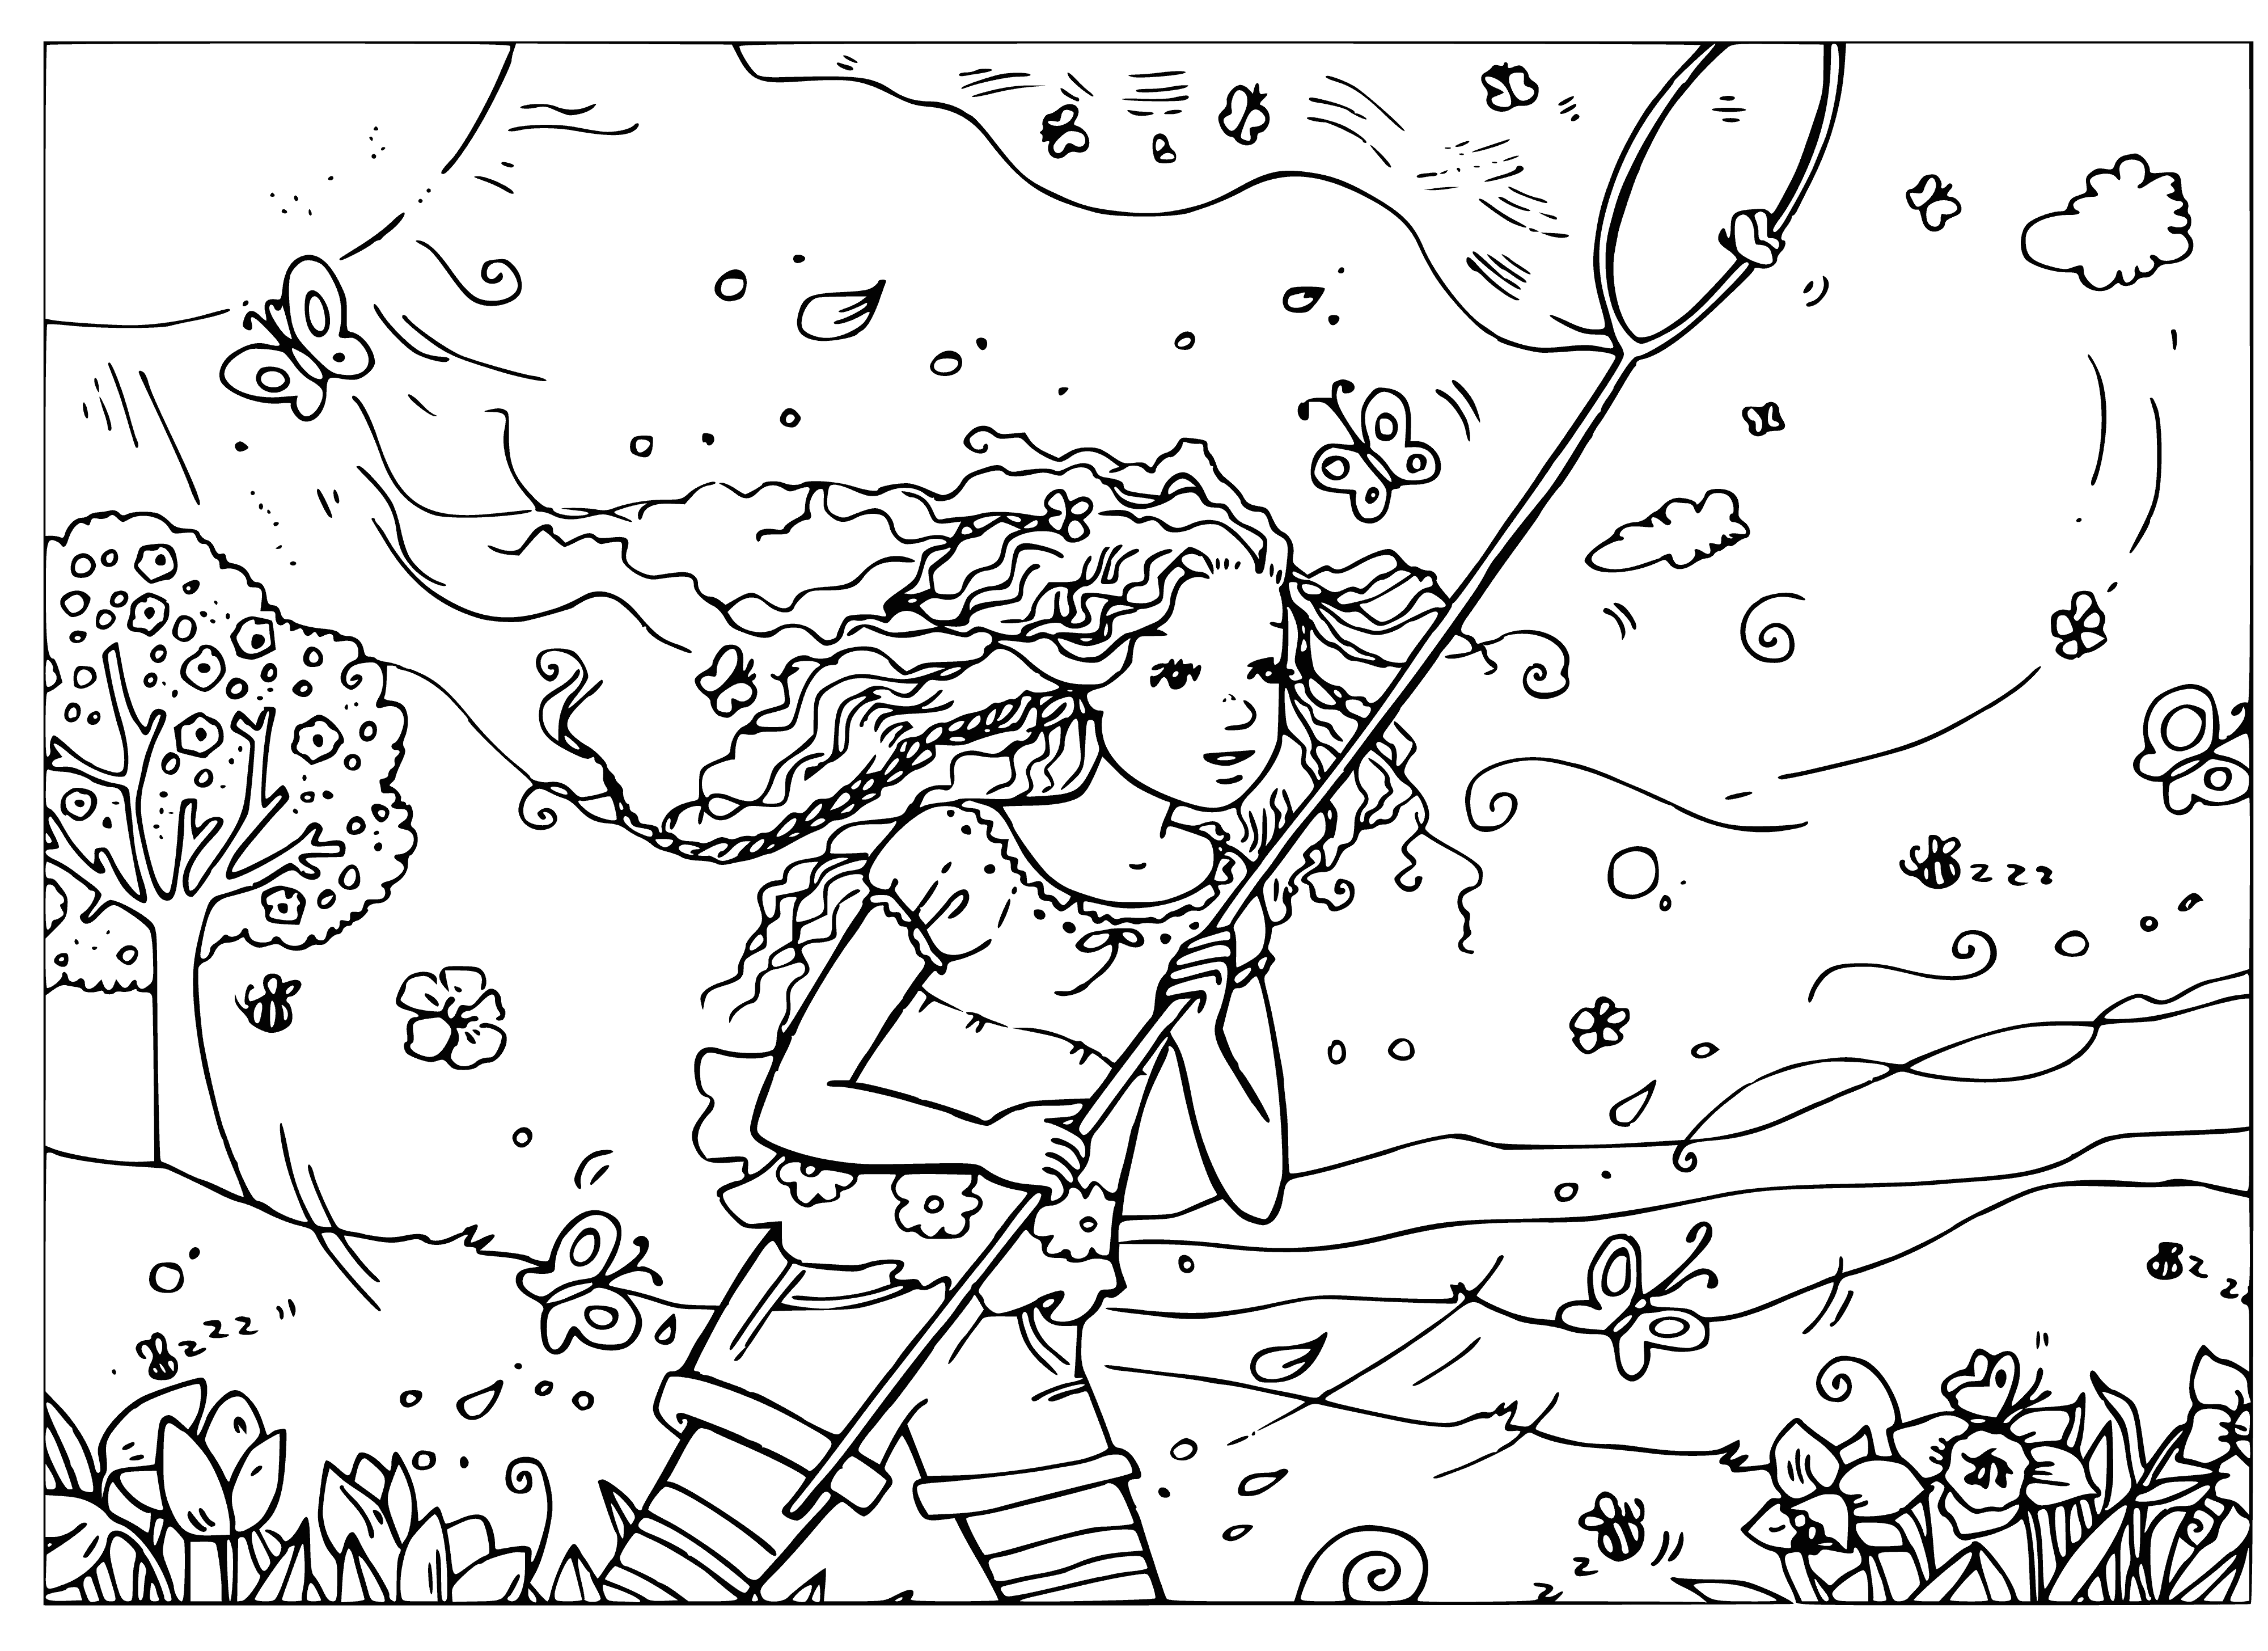 Summer in the meadow coloring page